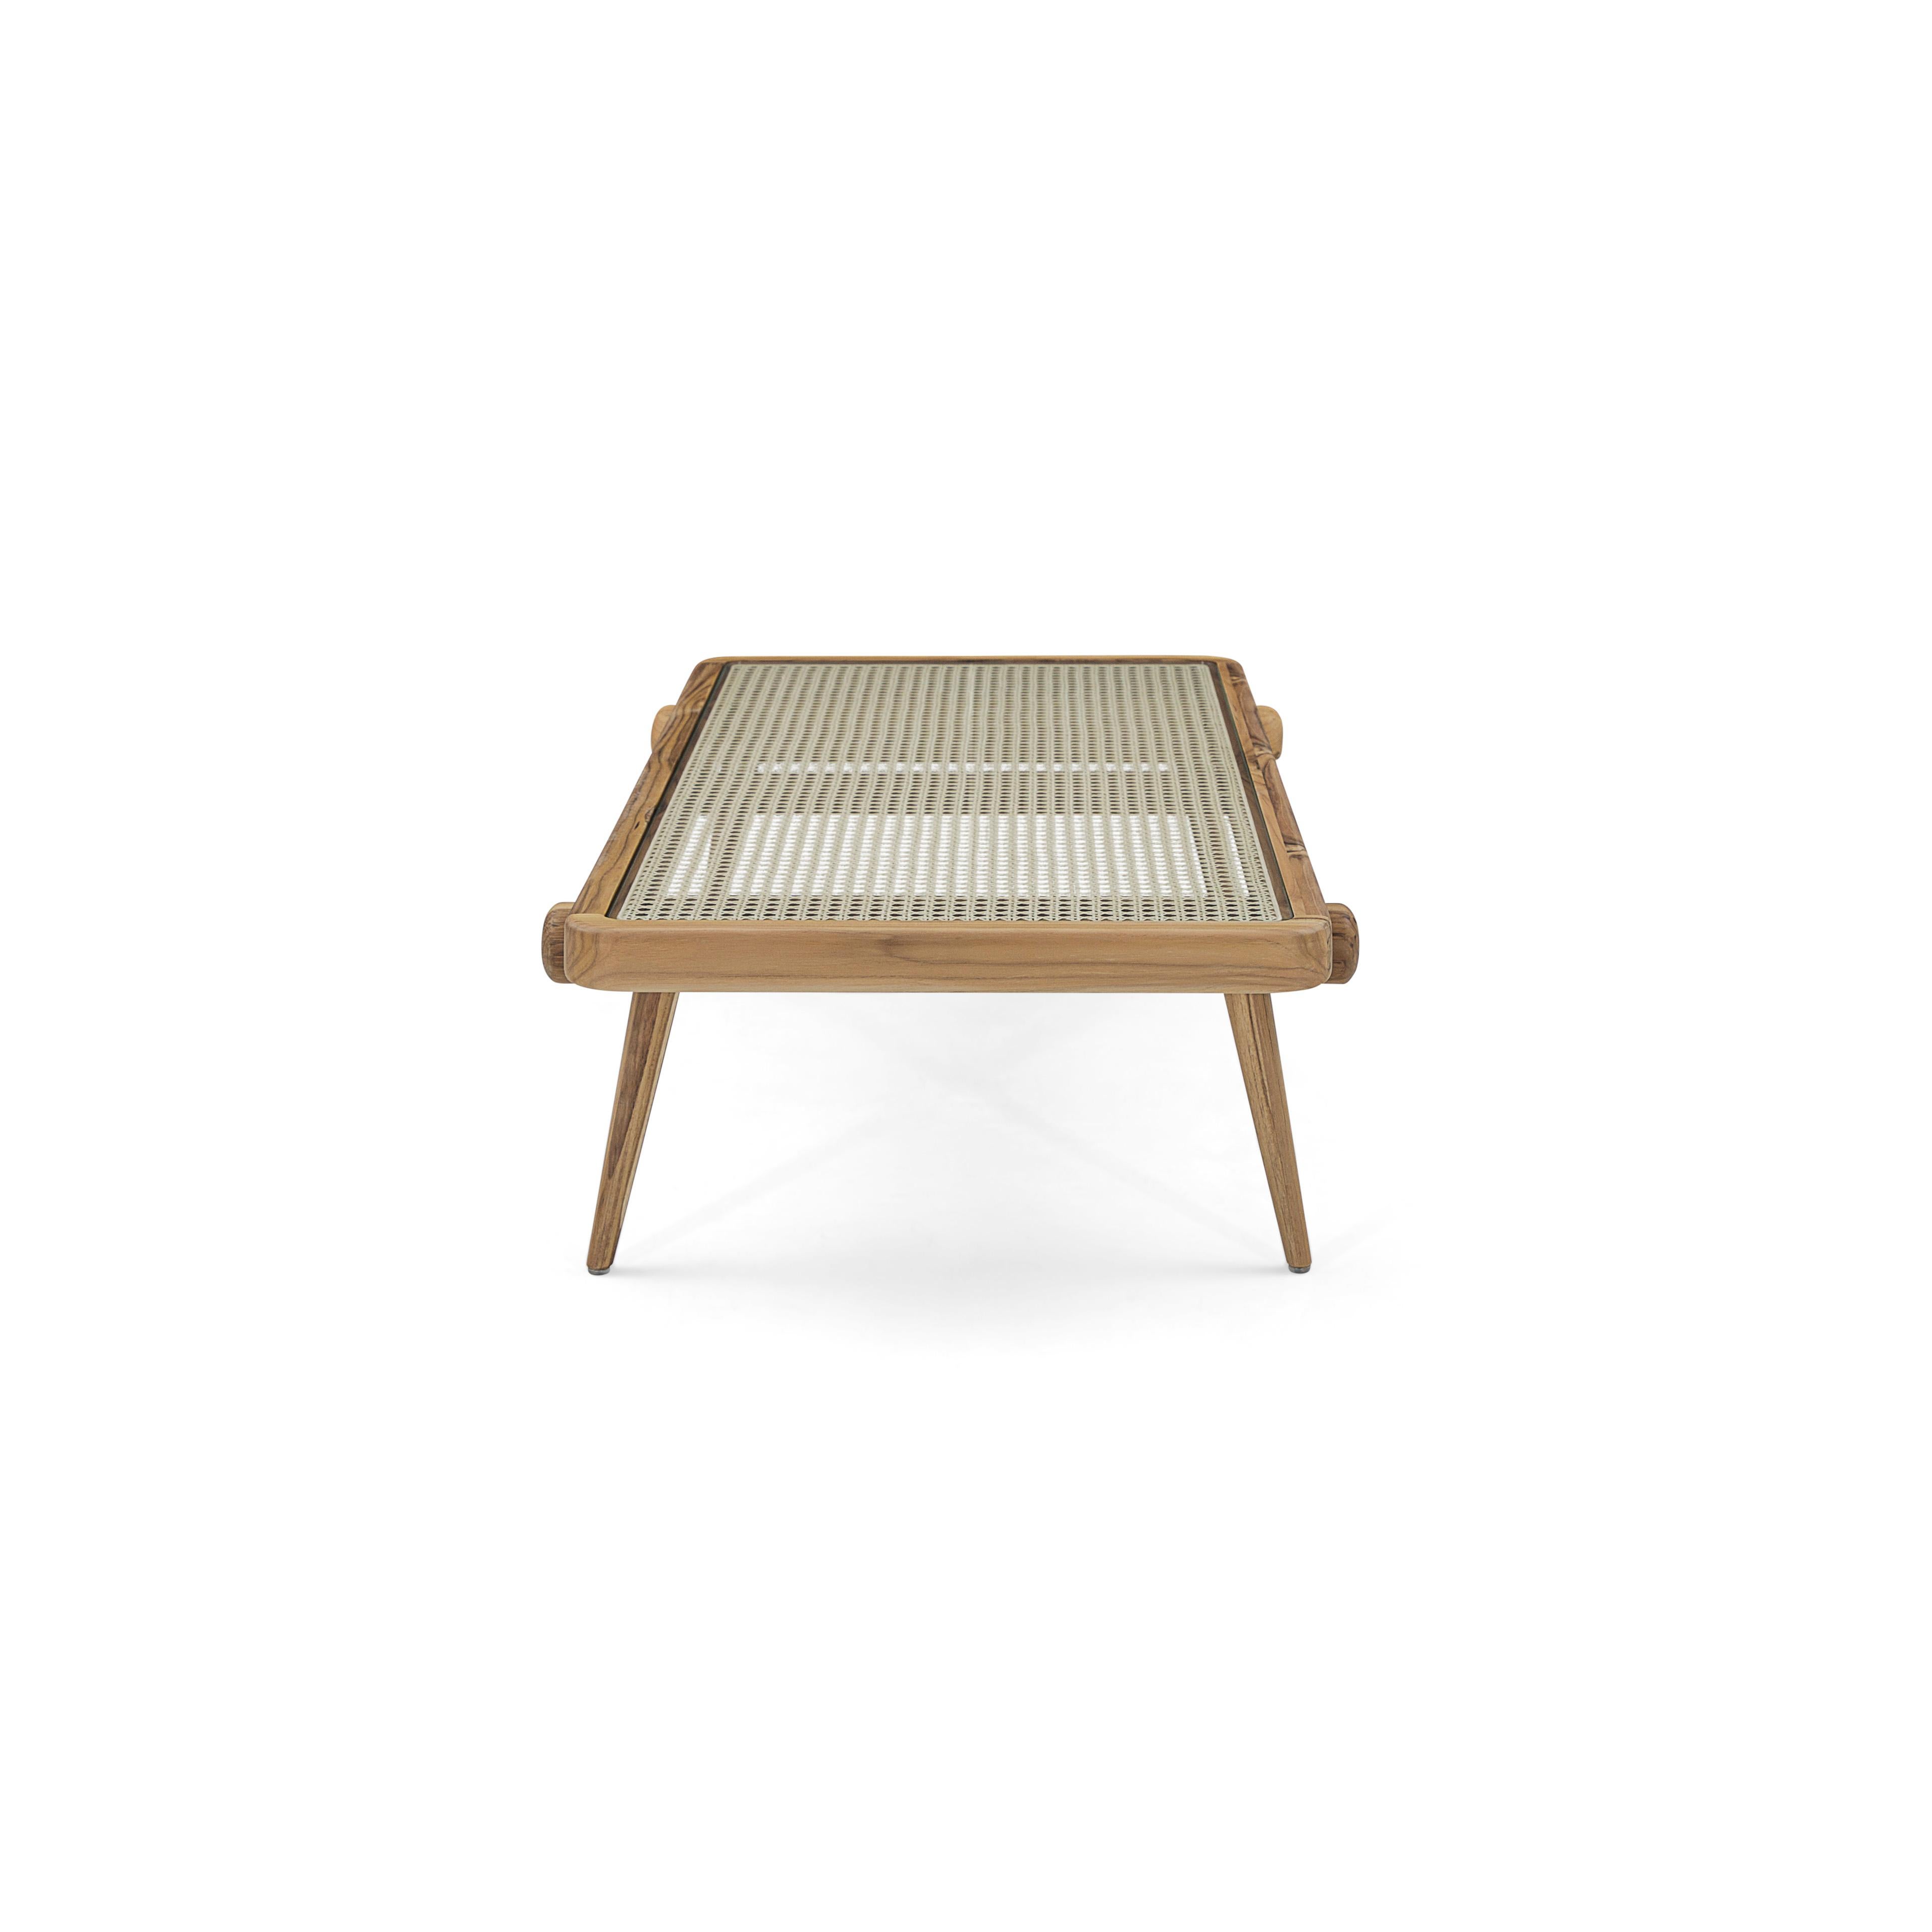 Mid-Century Modern Plot Coffee Table in Teak Wood Finish with Cane Under a Tempered Glass Top For Sale